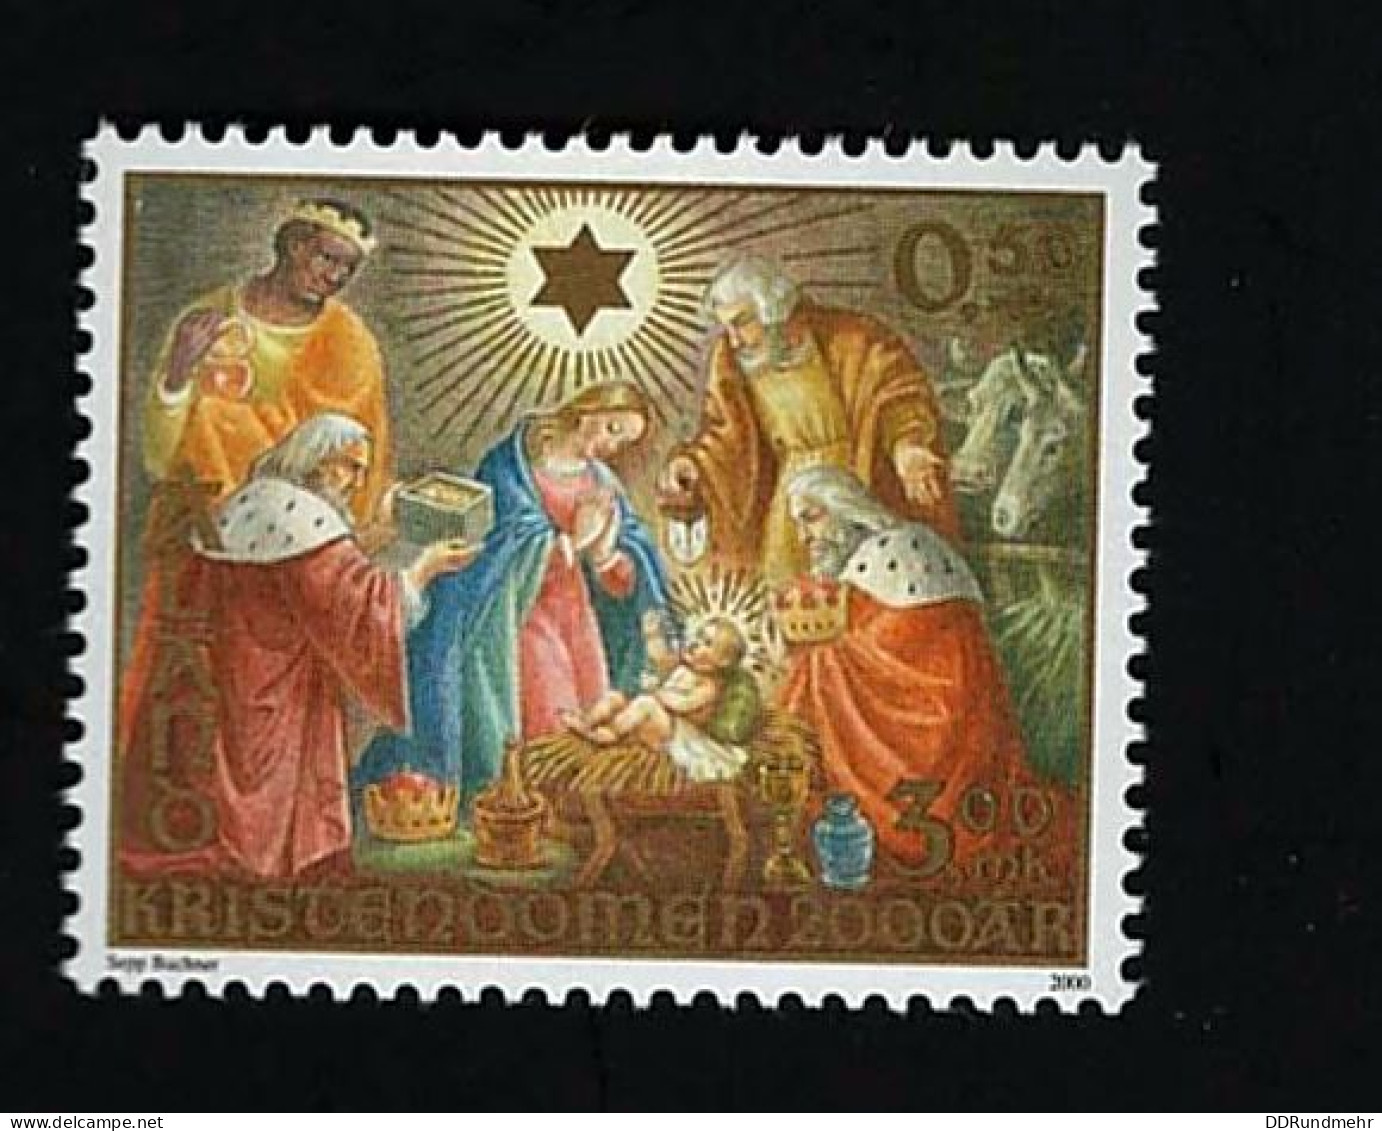 2000 Christmas  Michel AX 181 Stamp Number AX 172 Yvert Et Tellier AX 181 Stanley Gibbons AX 182 AFA AX 181 Xx MNH - Aland